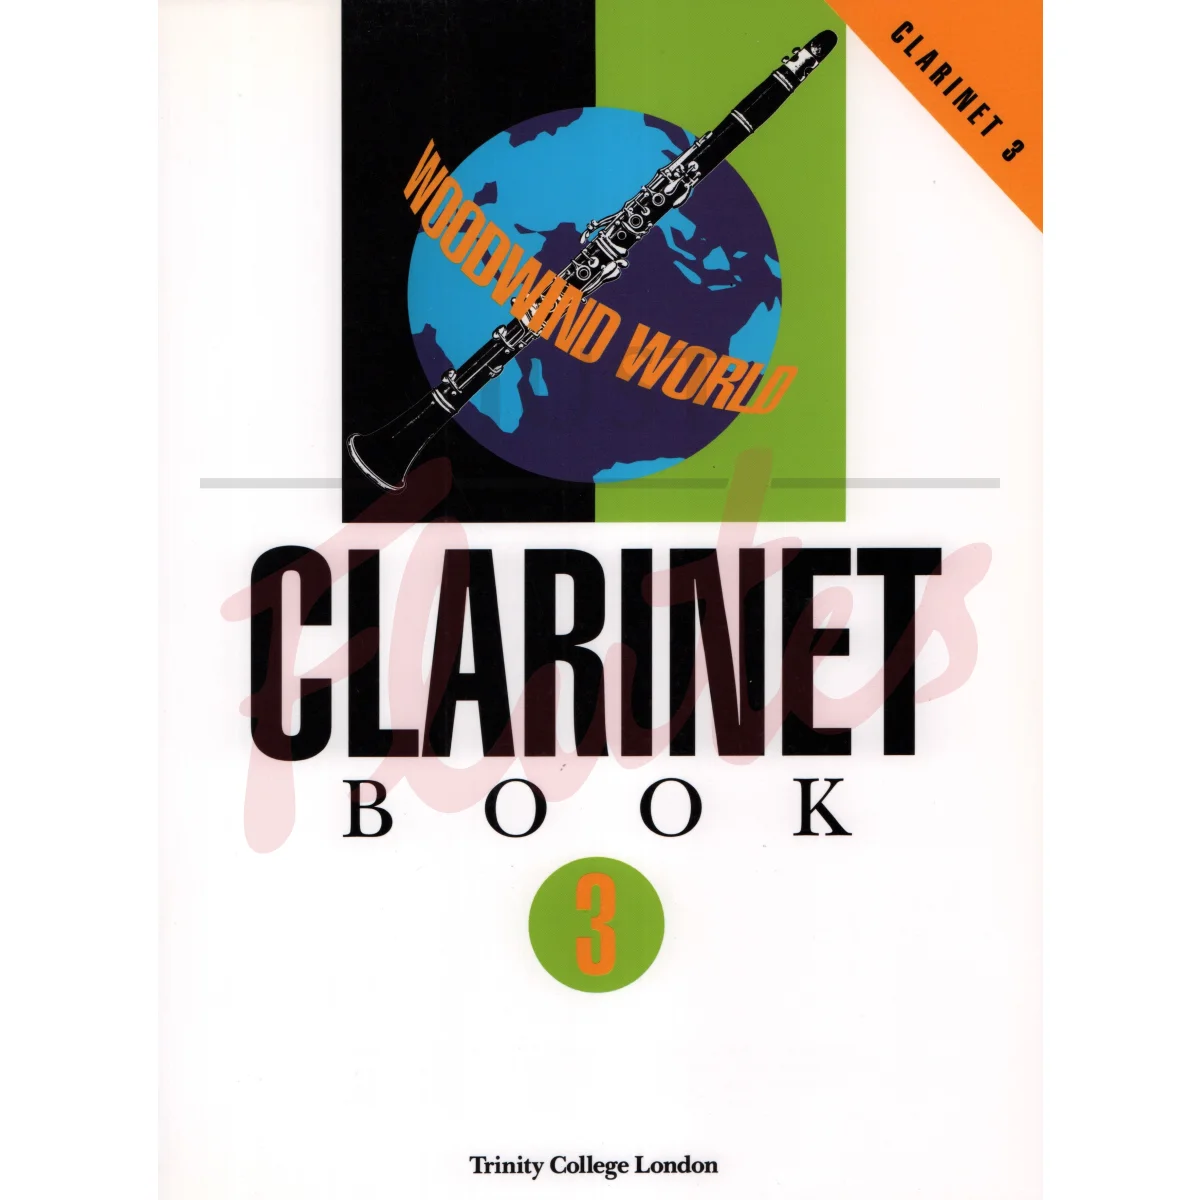 Woodwind World Clarinet 3 for Clarinet and Piano